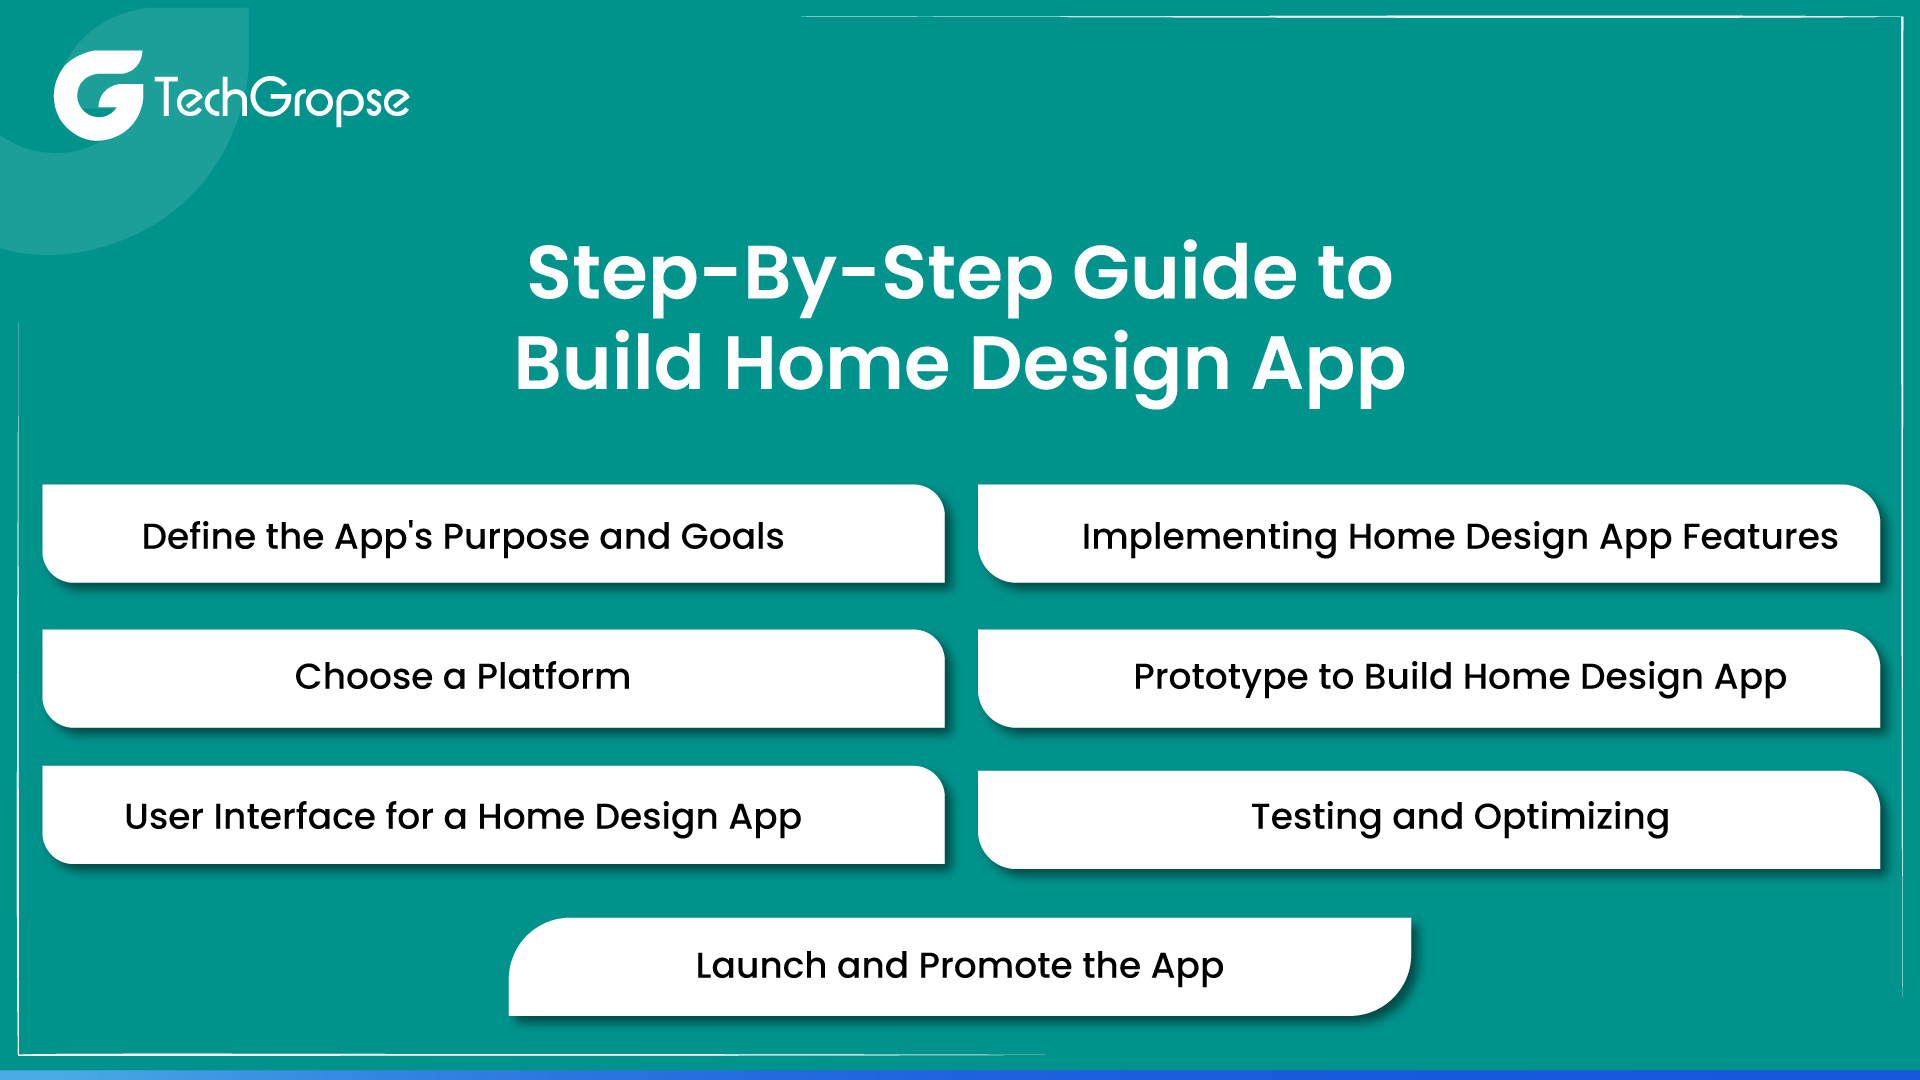 Step-By-Step Guide to Build Home Design App